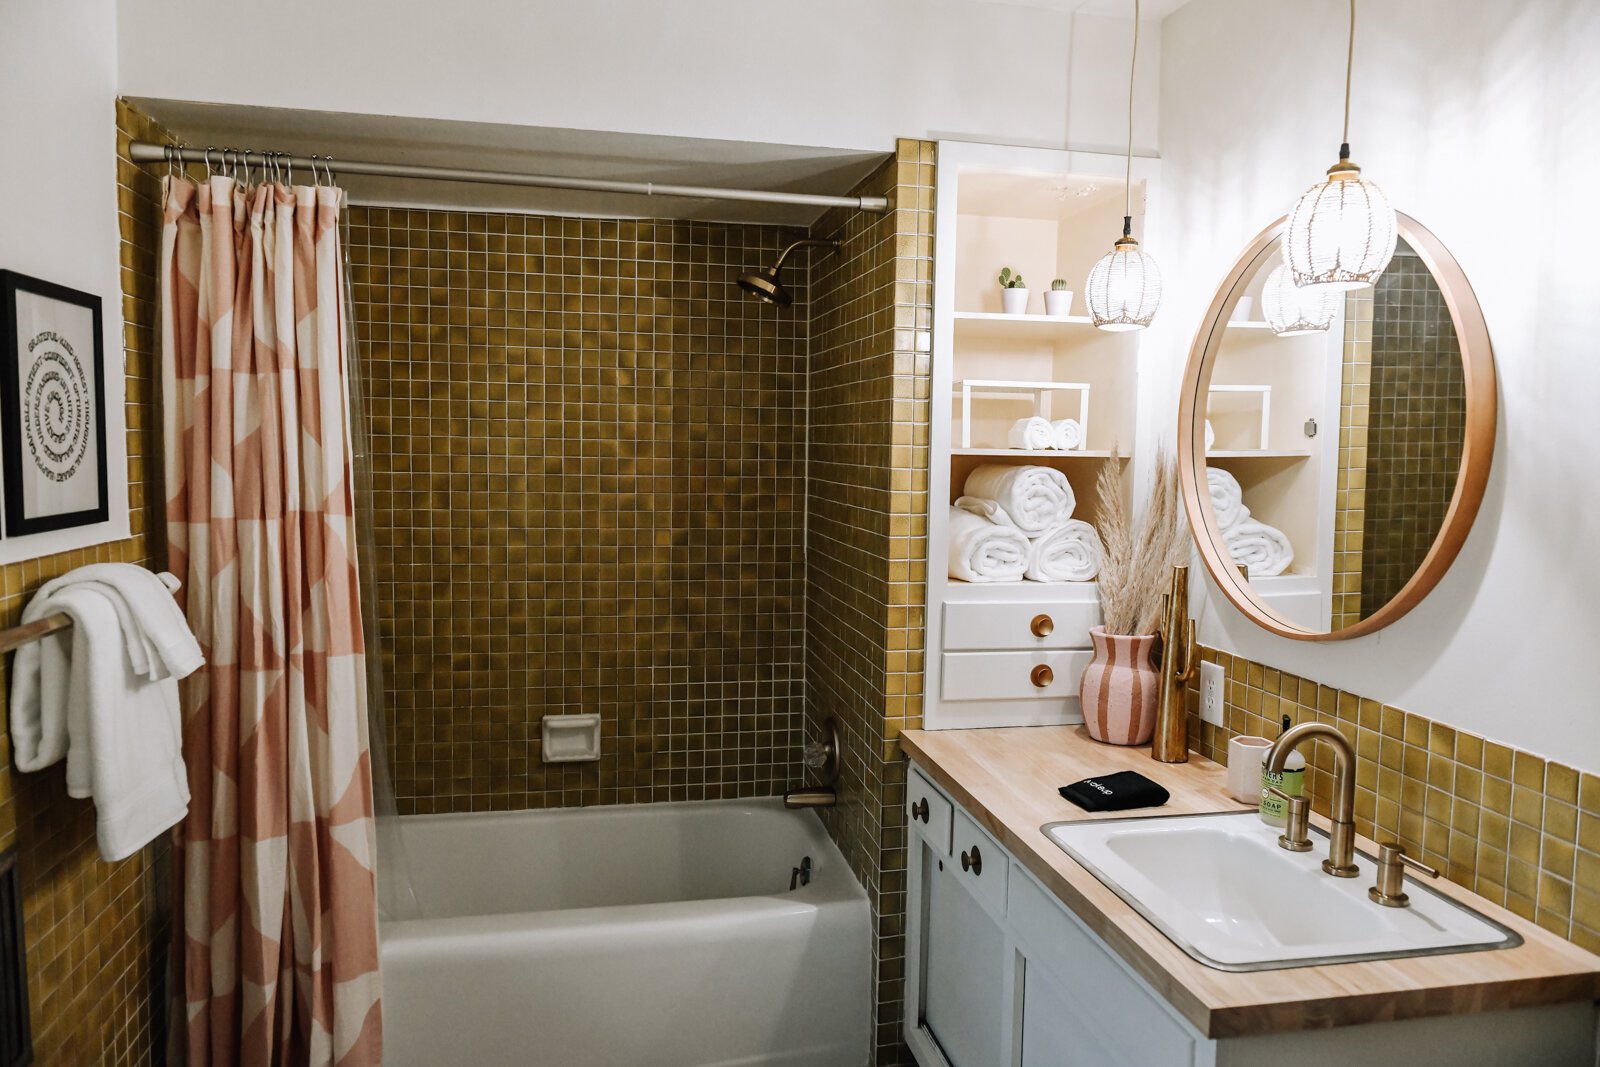 The master bathroom features a gold and pink color scheme.